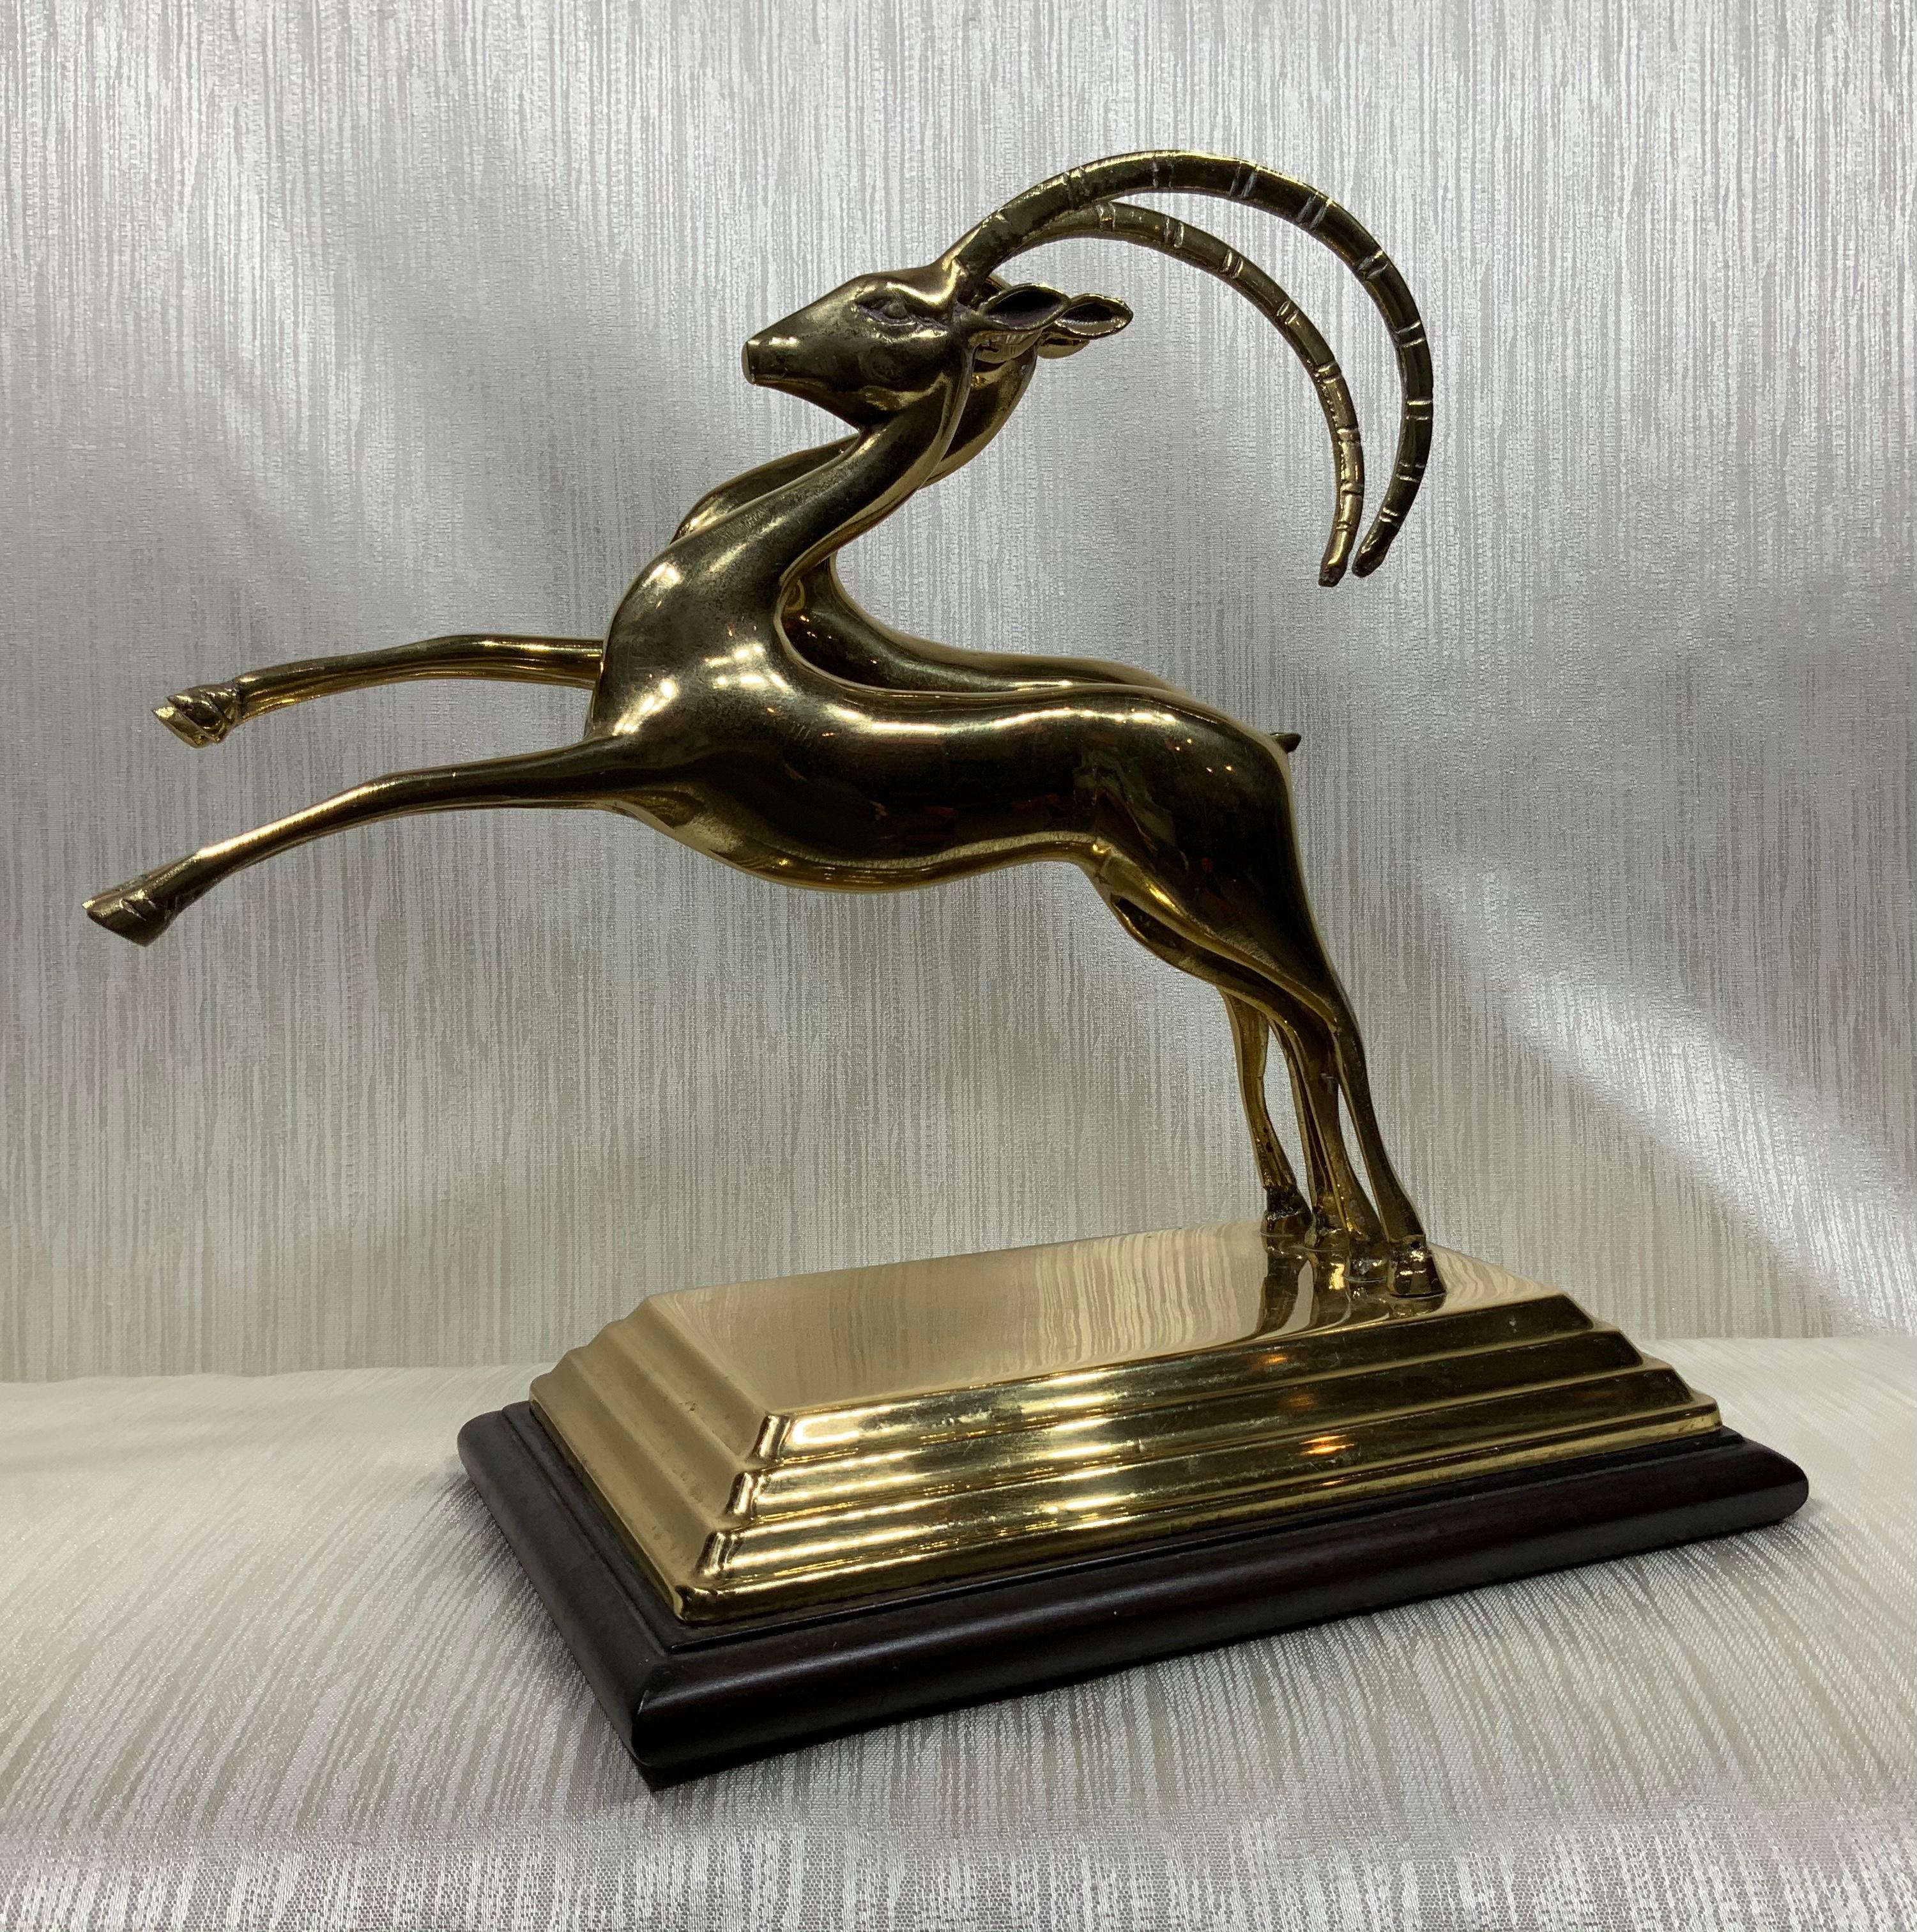 Elegant pair of ram made of solid brass, mounted on a base. Will make great addition to any room decor.